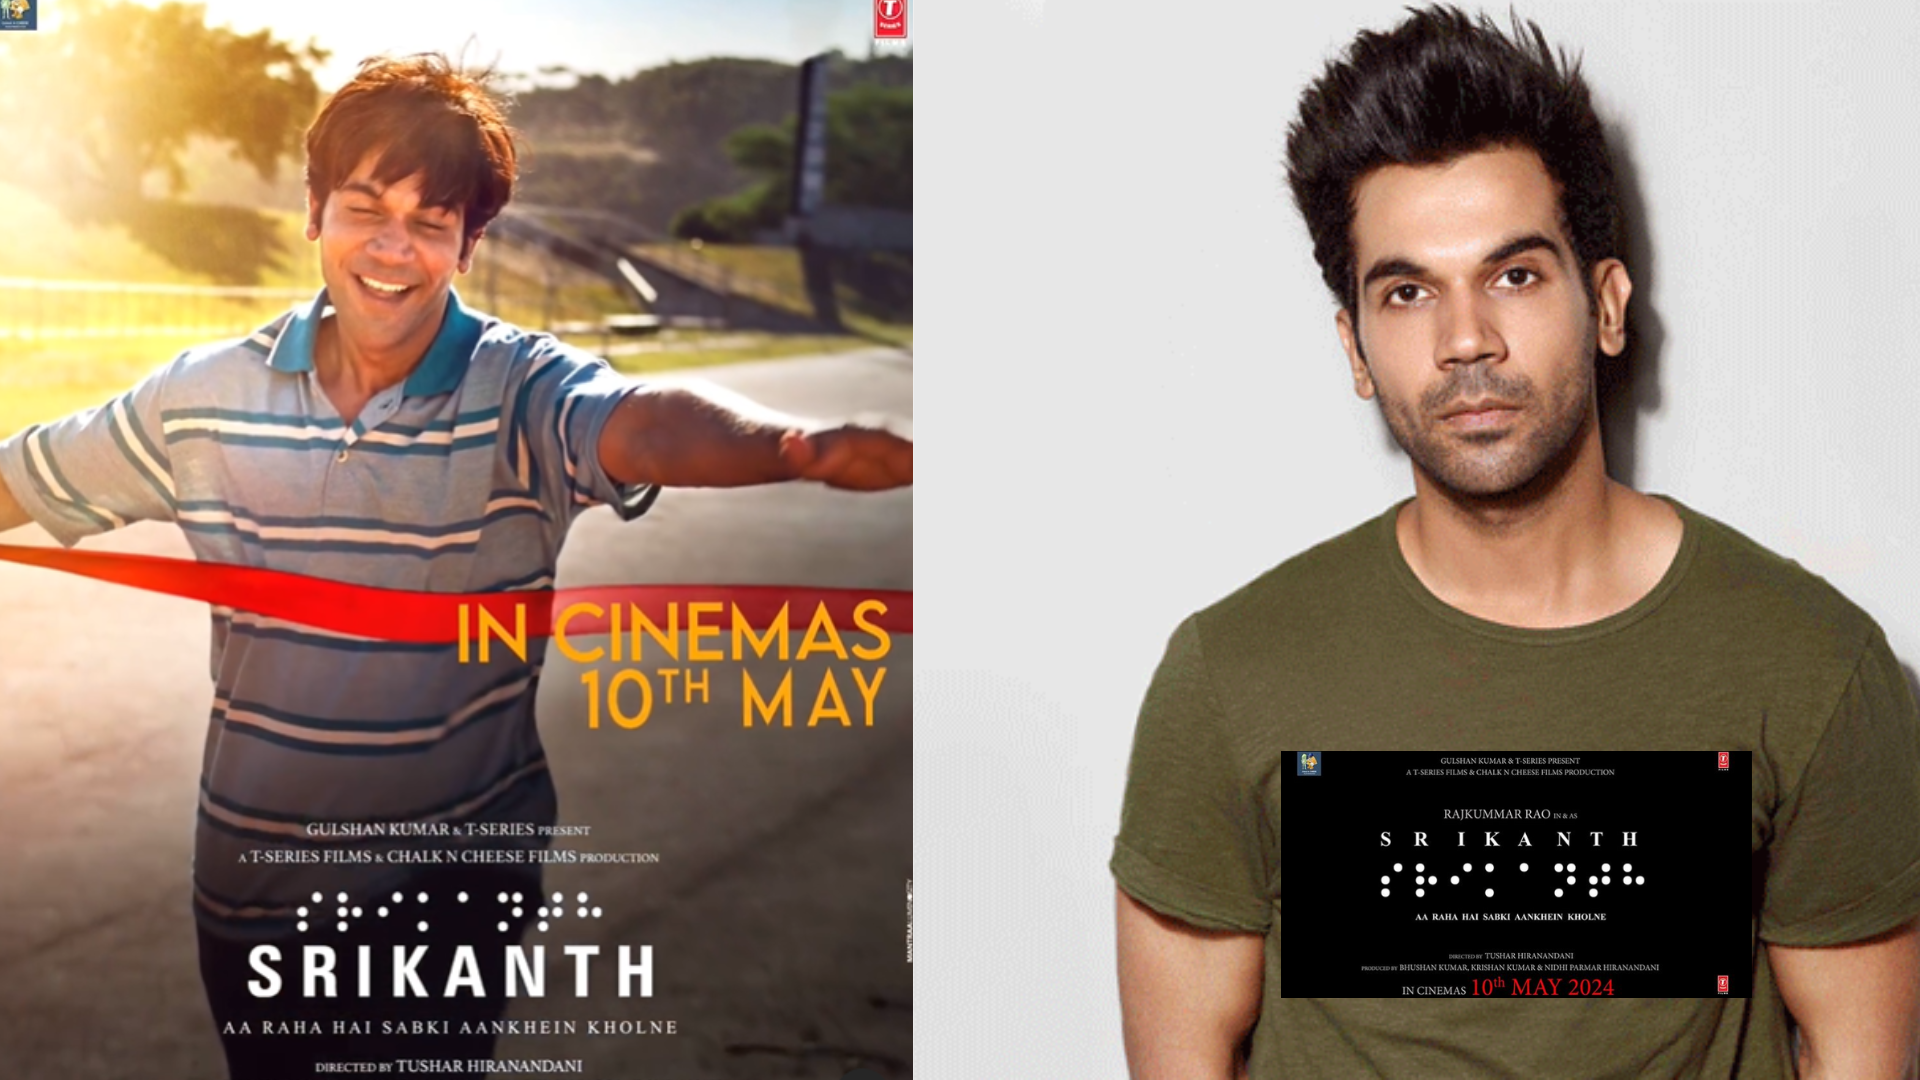 Rajkummar Rao unveils first look of 'Srikanth' biopic, set to hit screens on May 10